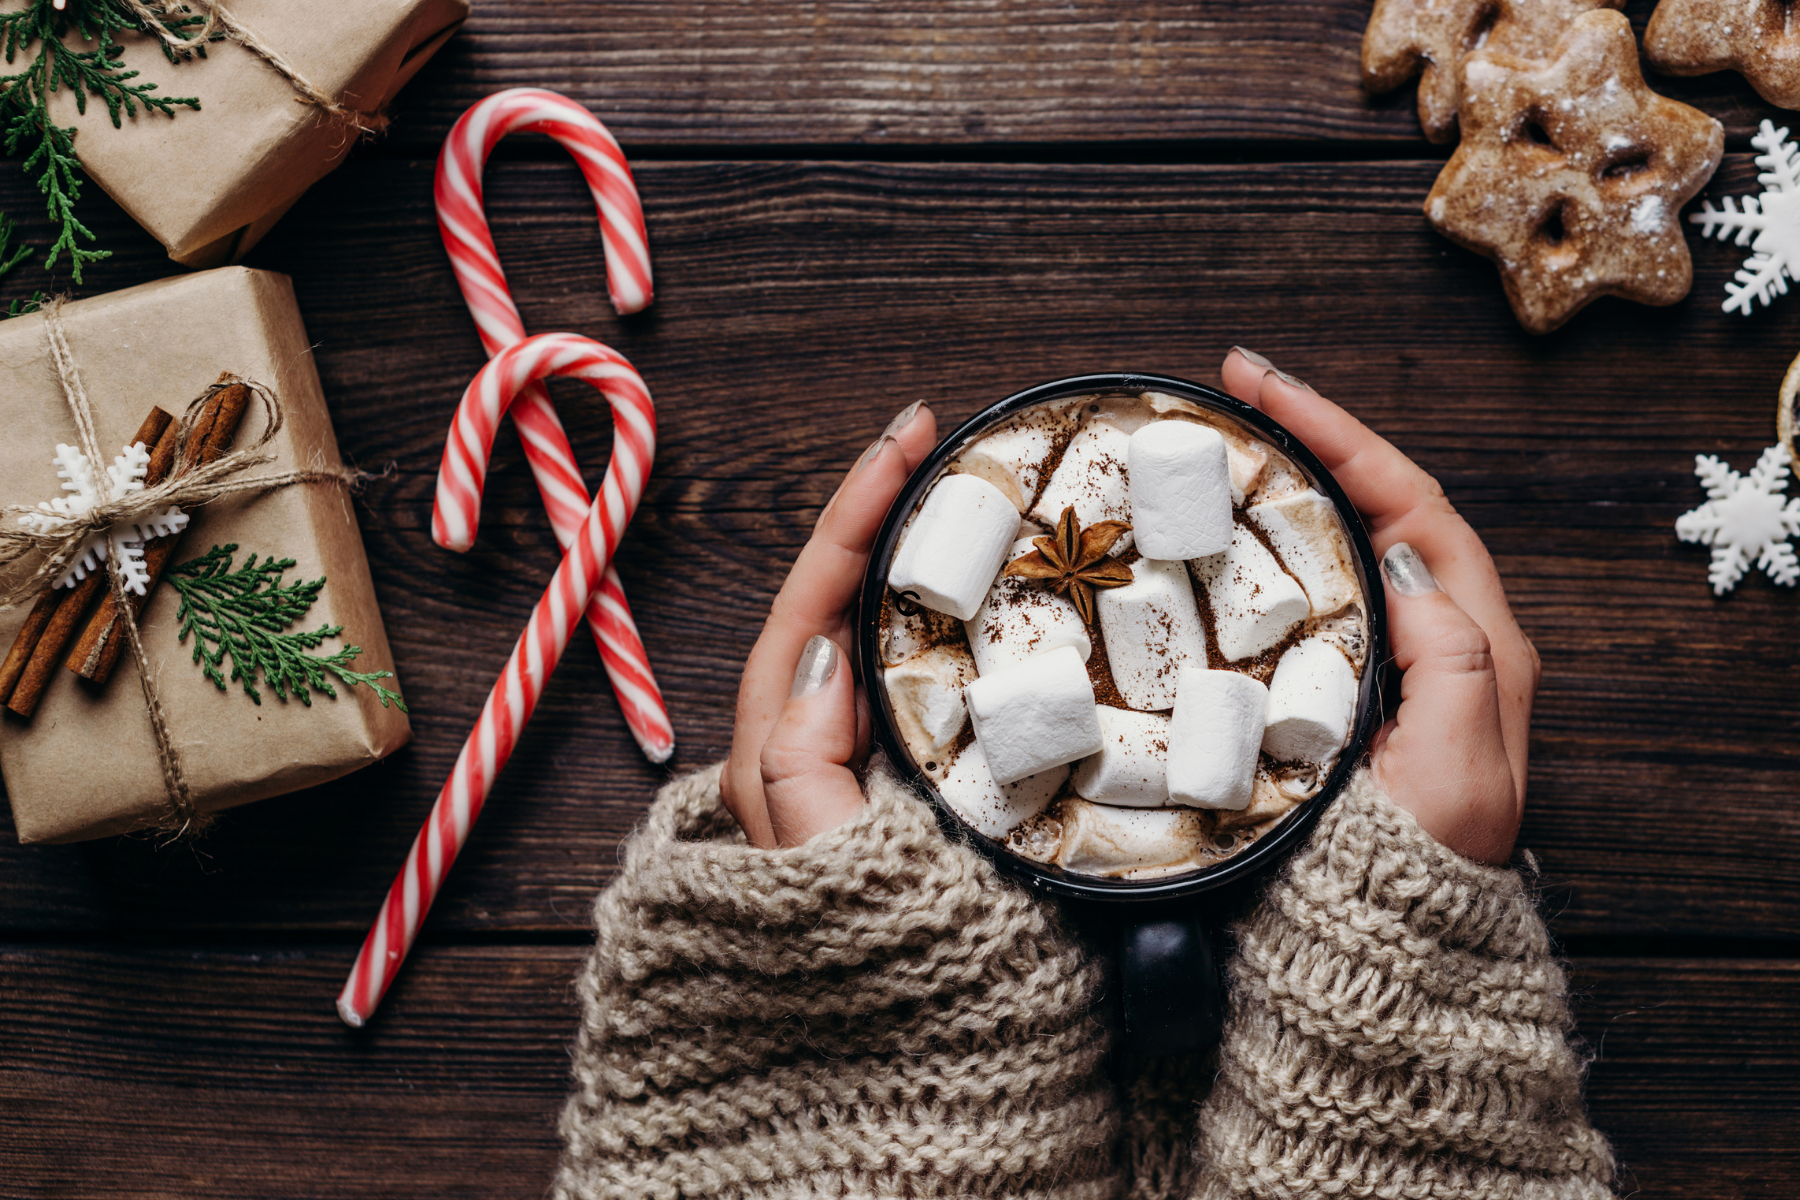 hands holding holiday hot chocolate with marshmallows on a wooden table. Candy canes and presents surround the hot chocolate on the table